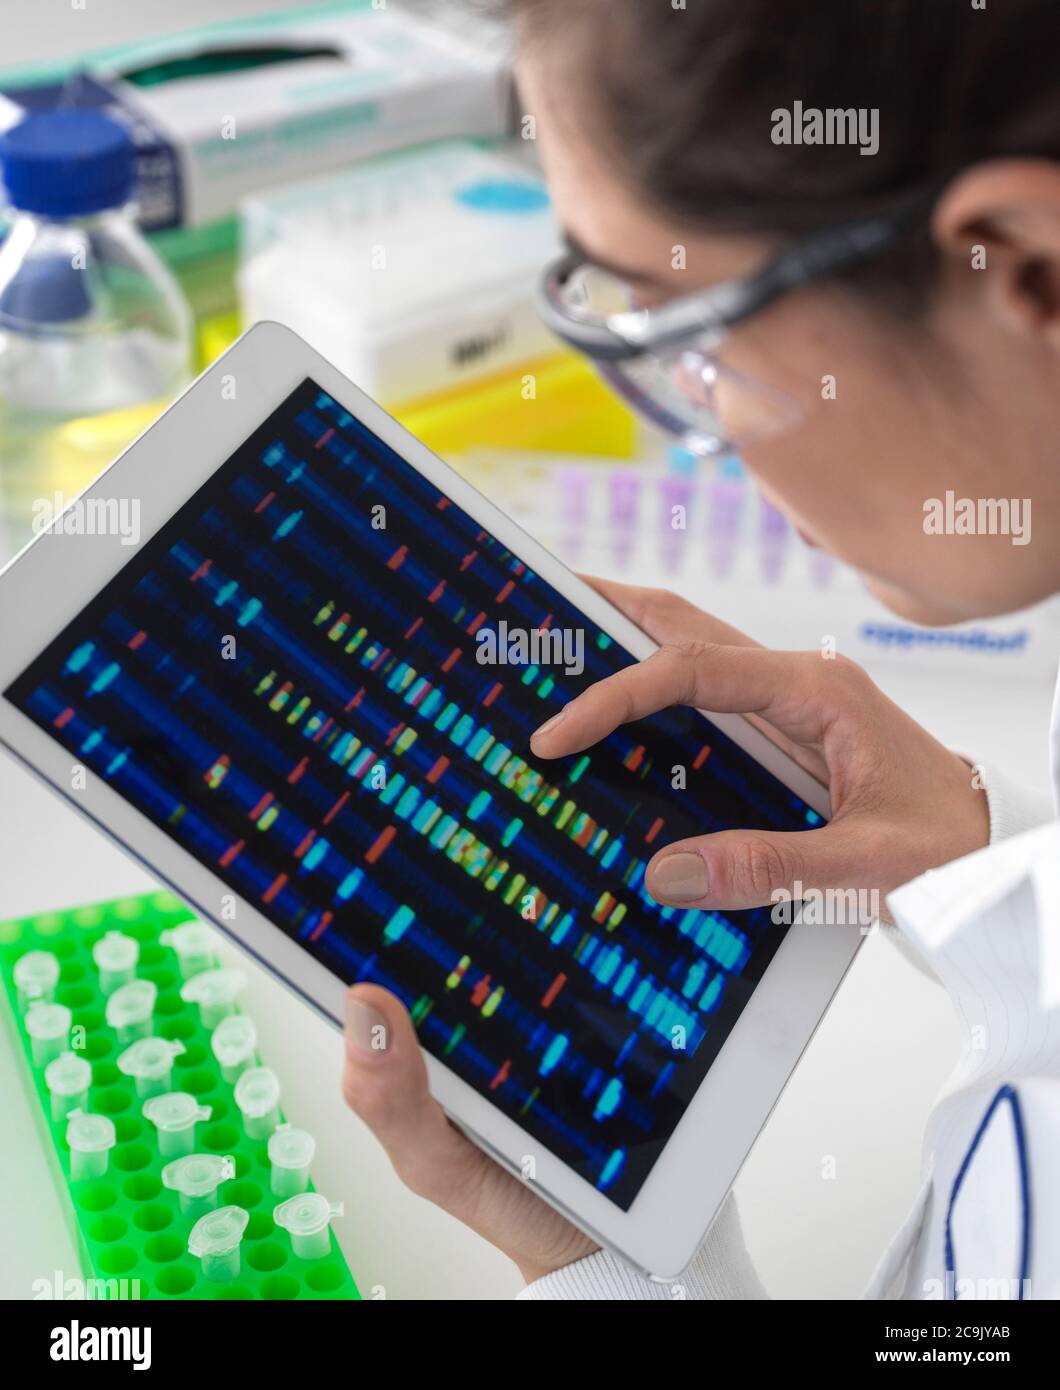 Scientist viewing DNA (deoxyribonucleic acid) profiles on a touch screen tablet during a genetic experiment. Stock Photo